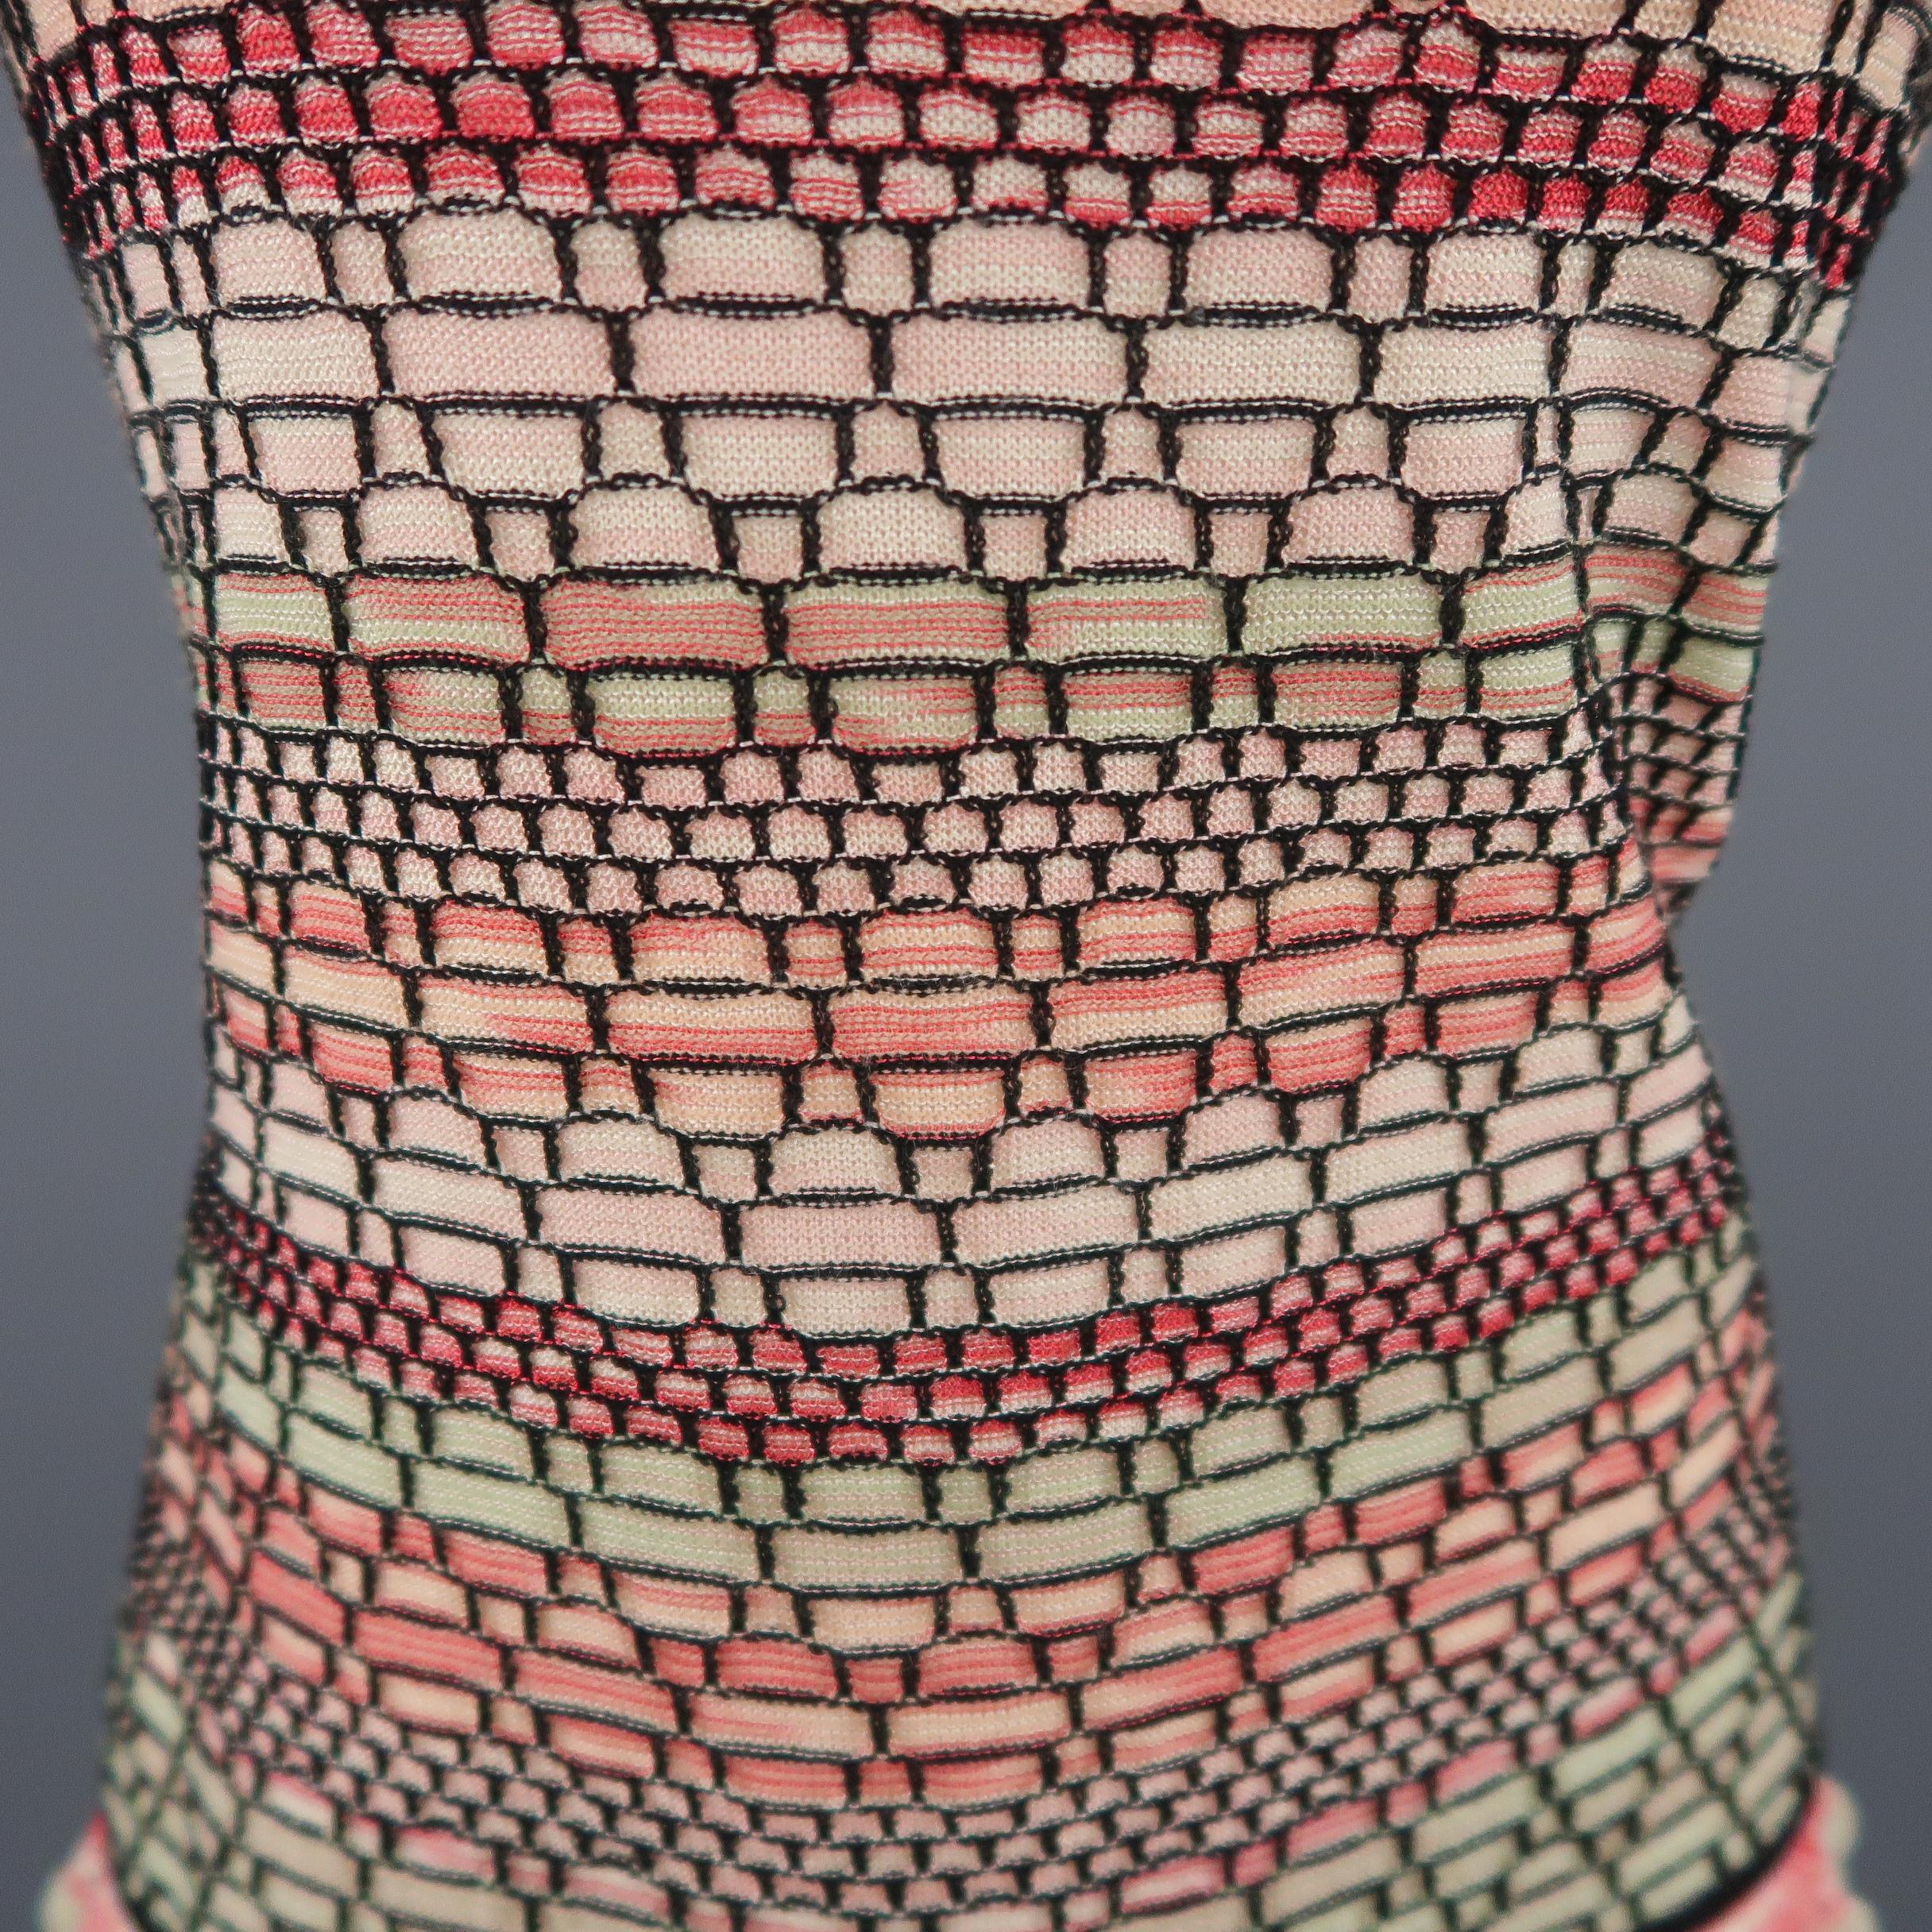 M MISSONI tank top comes in a textured knit with hues of pink and green with an all over black patter, scoop neck, and black piping, and ruffled hem. Matching cardigan available separately. Made in Italy.
 
Excellent Pre-Owned Condition.
Marked: 14
